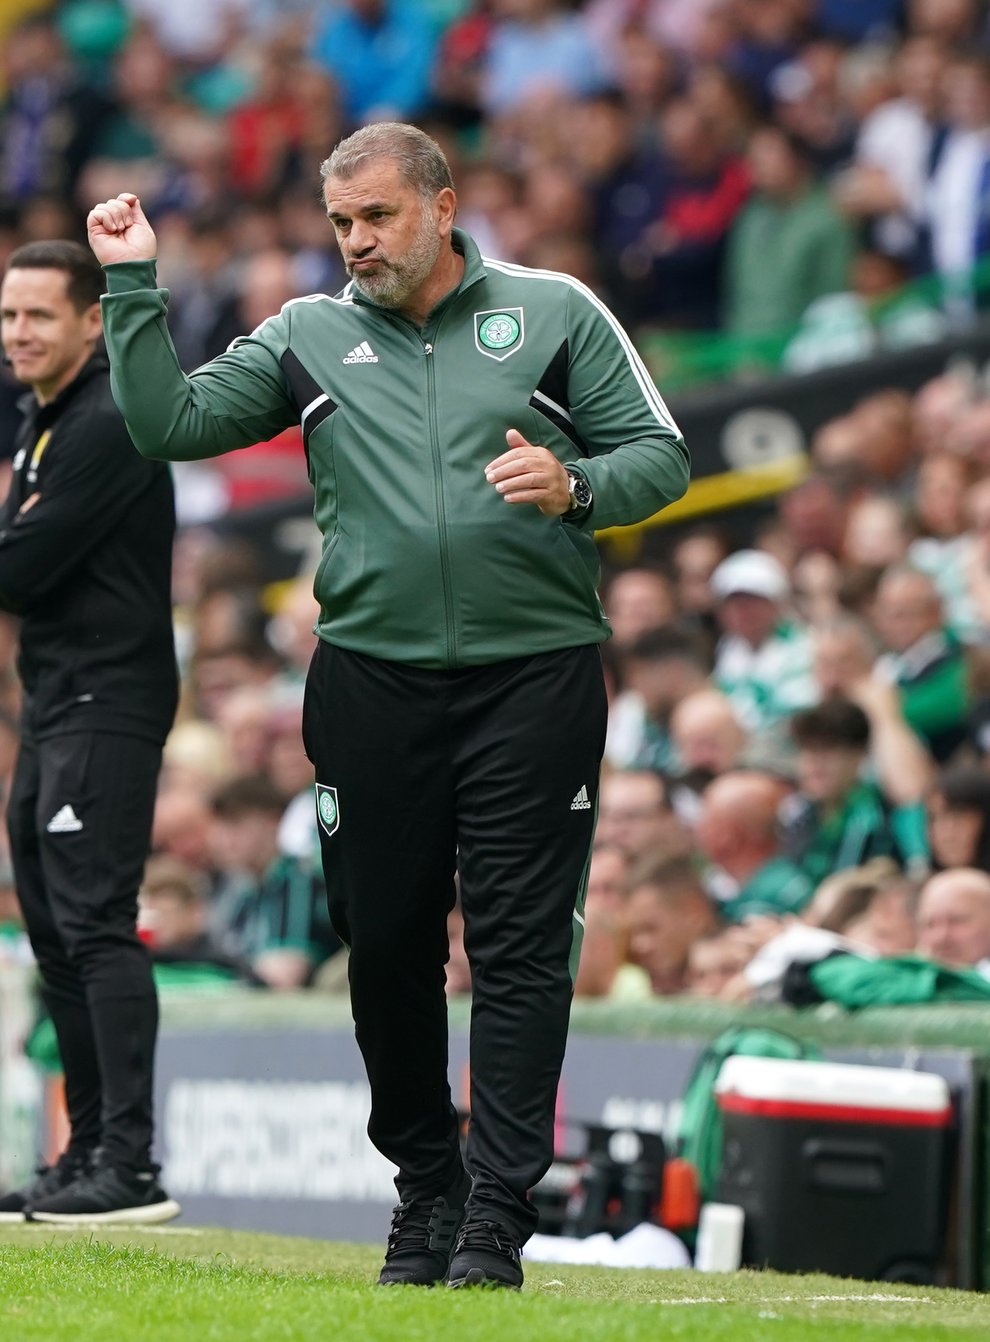 Ange Postecoglou’s Celtic kick off their title defence against Aberdeen (Andrew Milligan/PA)